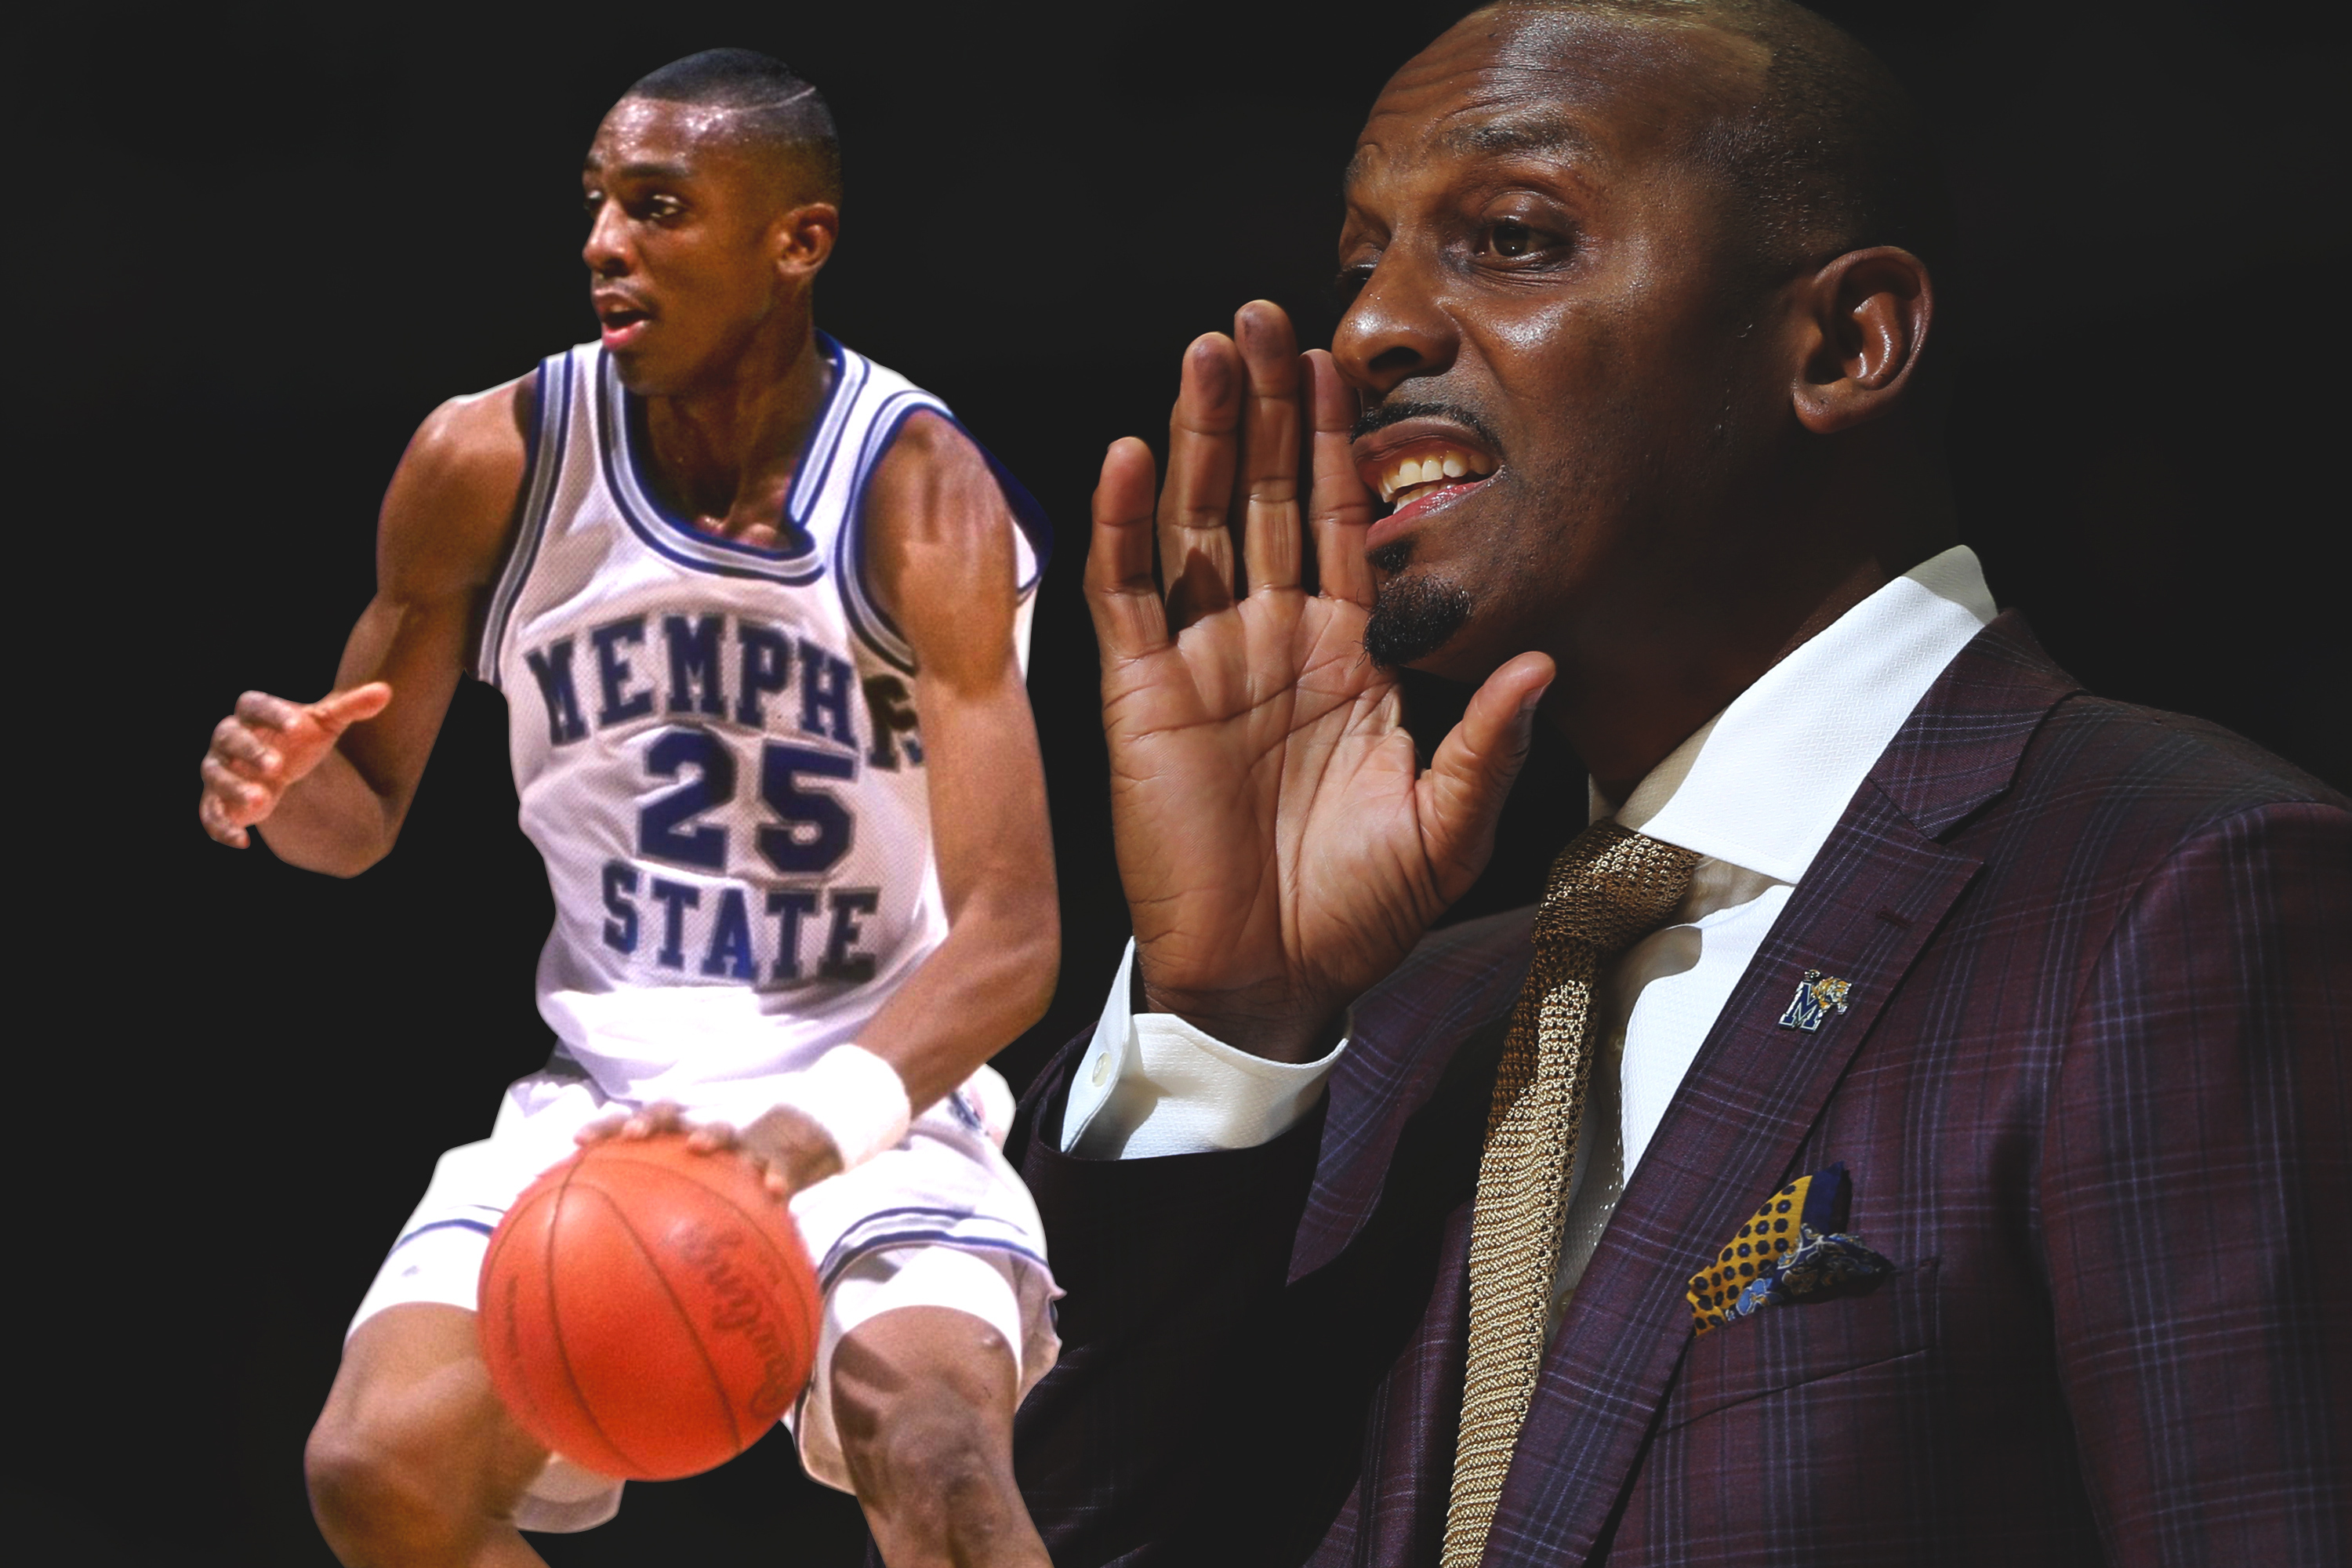 Penny Hardaway, Memphis Tigers coach? 5 things to know